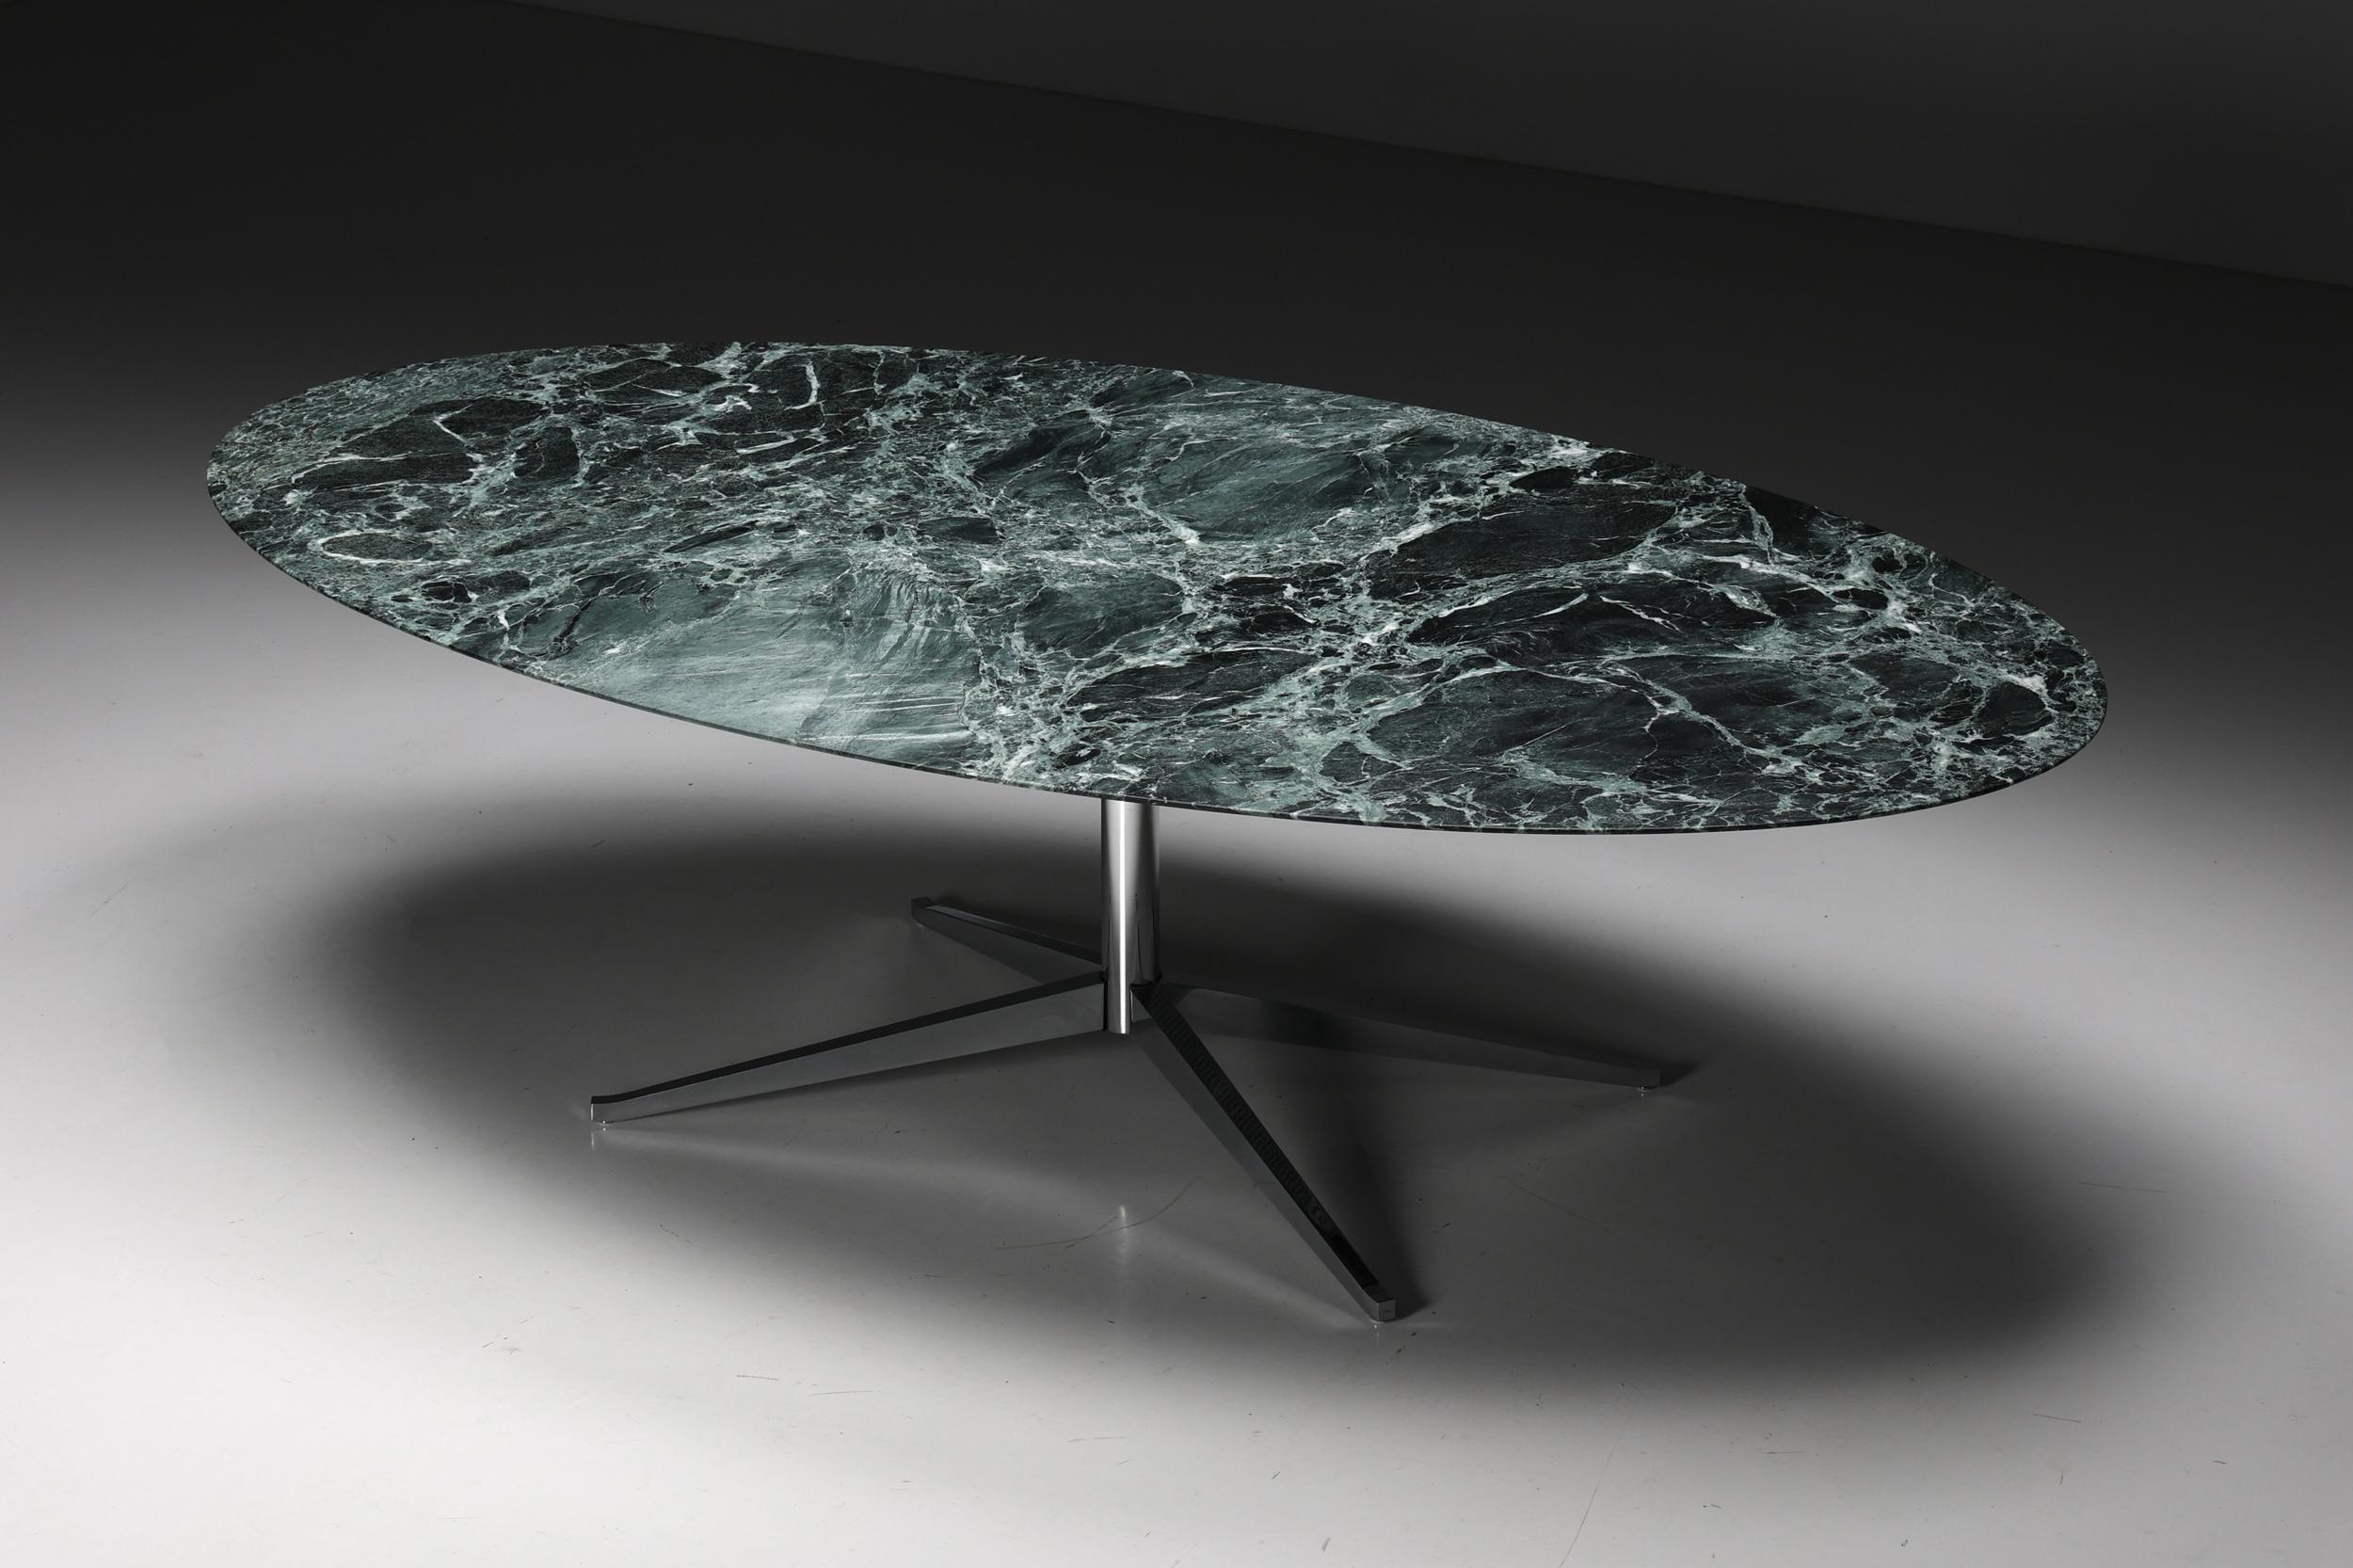 Florence Knoll; oval; green; marble; dining table; 1960; 1960s Design; Dining Area; Dining Room; United States; Knoll Design;

An exceptional oval green marble dining table, designed by Florence Knoll and manufactured in the United States by Knoll